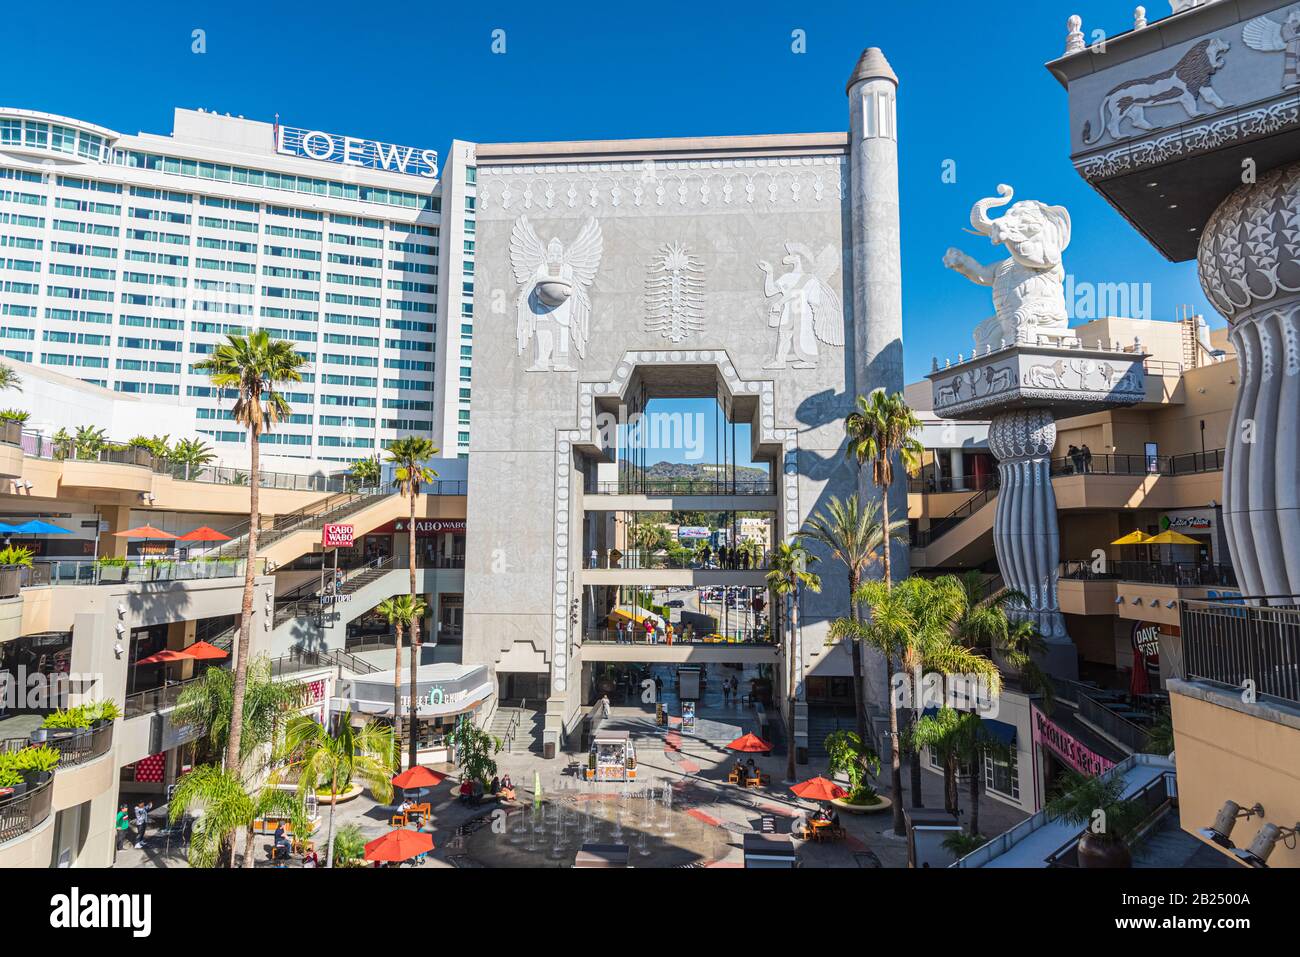 Los Angeles, California - February 8, 2019: View of the interior square of the Dolby Theatre in Los Angeles Stock Photo